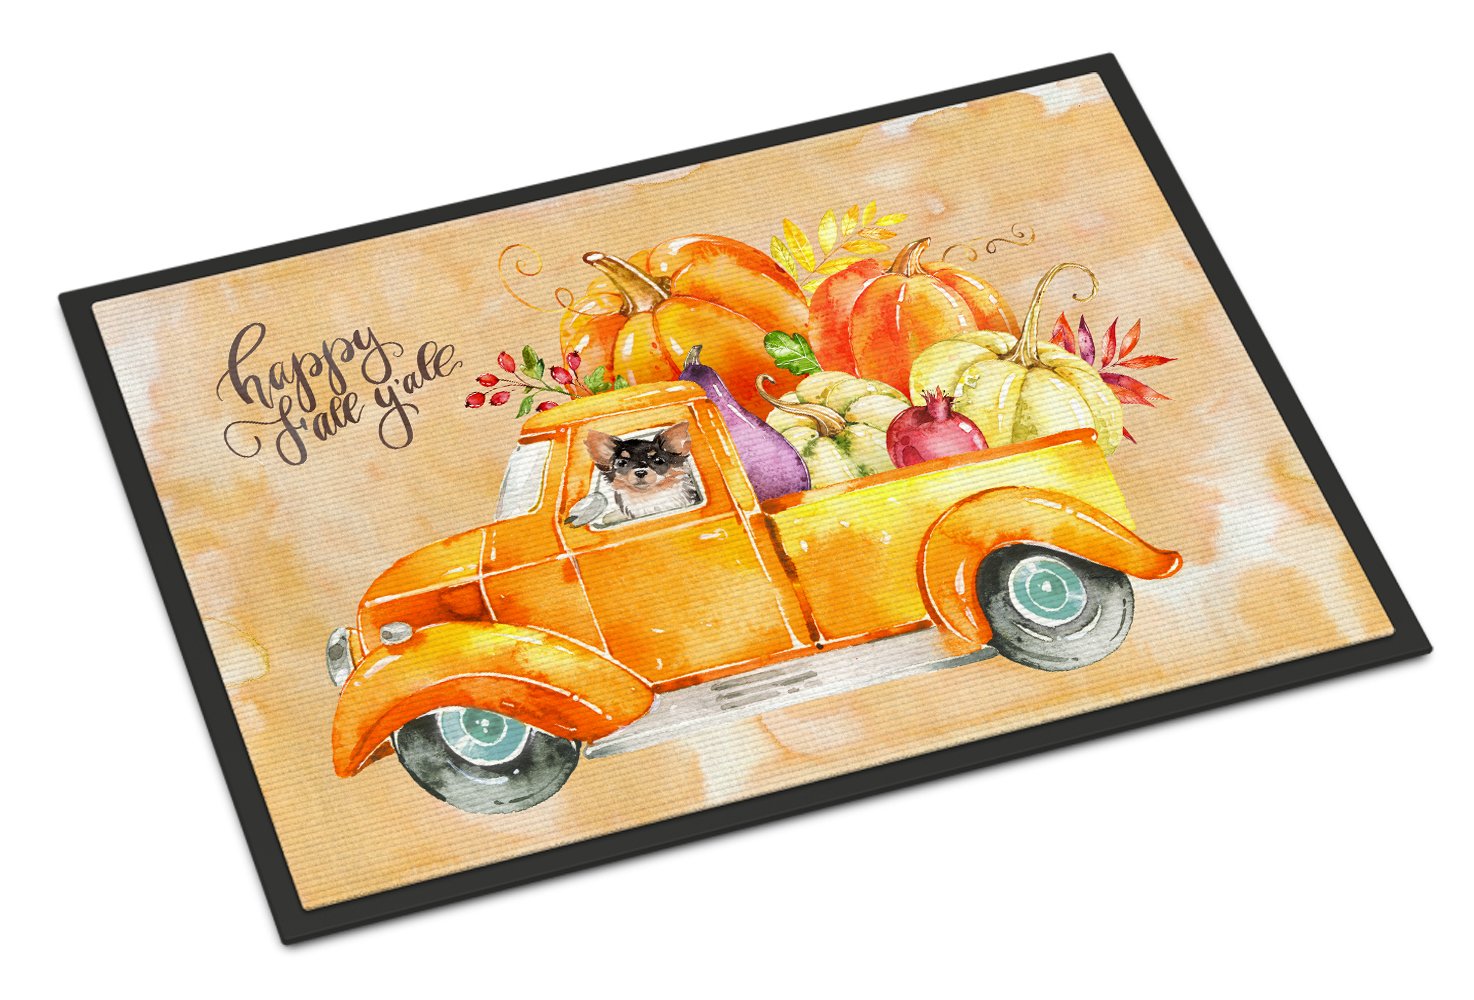 Fall Harvest Long Haired Chihuahua Indoor or Outdoor Mat 24x36 CK2672JMAT by Caroline's Treasures